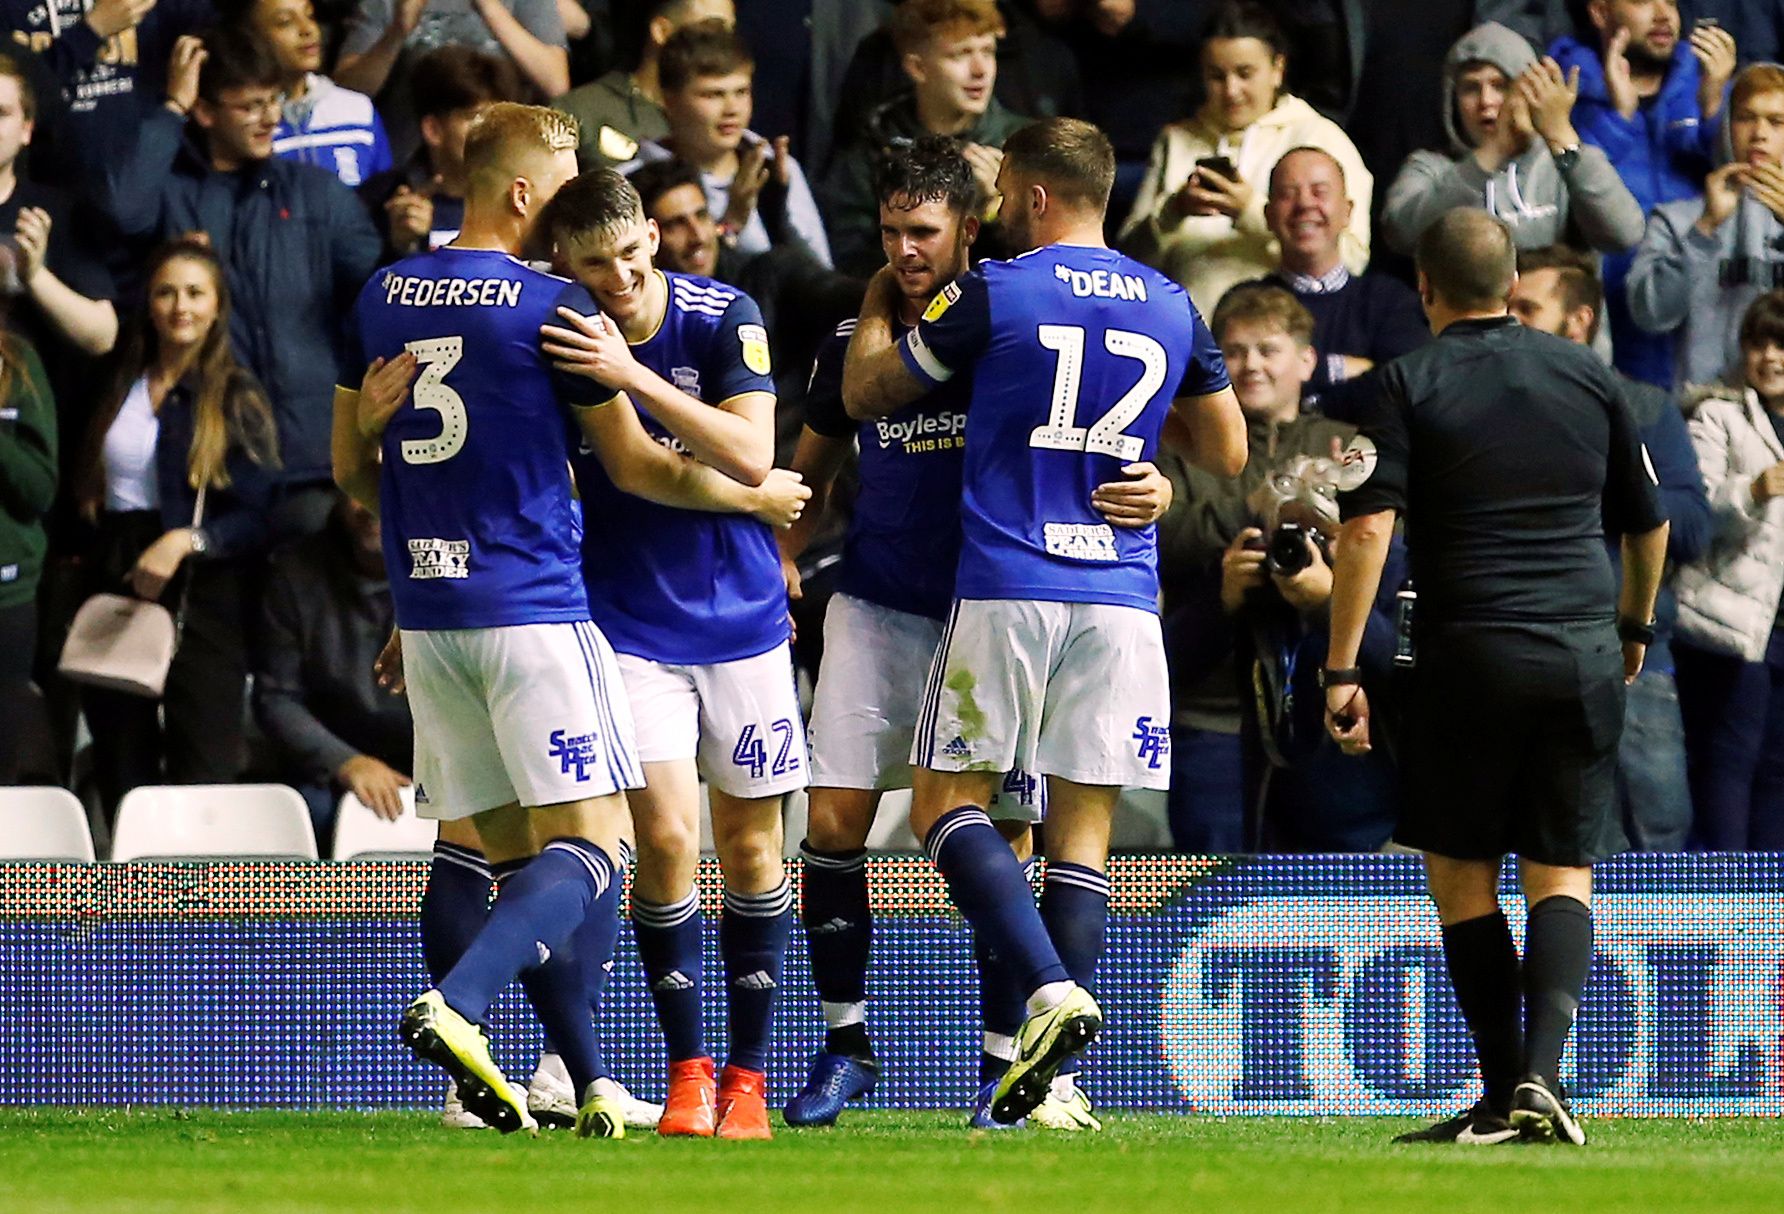 Soccer Football - Championship - Birmingham City v Barnsley - St Andrew's, Birmingham, Britain - August 20, 2019   Birmingham City's Alvaro Gimenez celebrates with team mates after he scored their second goal   Action Images/Craig Brough    EDITORIAL USE ONLY. No use with unauthorized audio, video, data, fixture lists, club/league logos or 